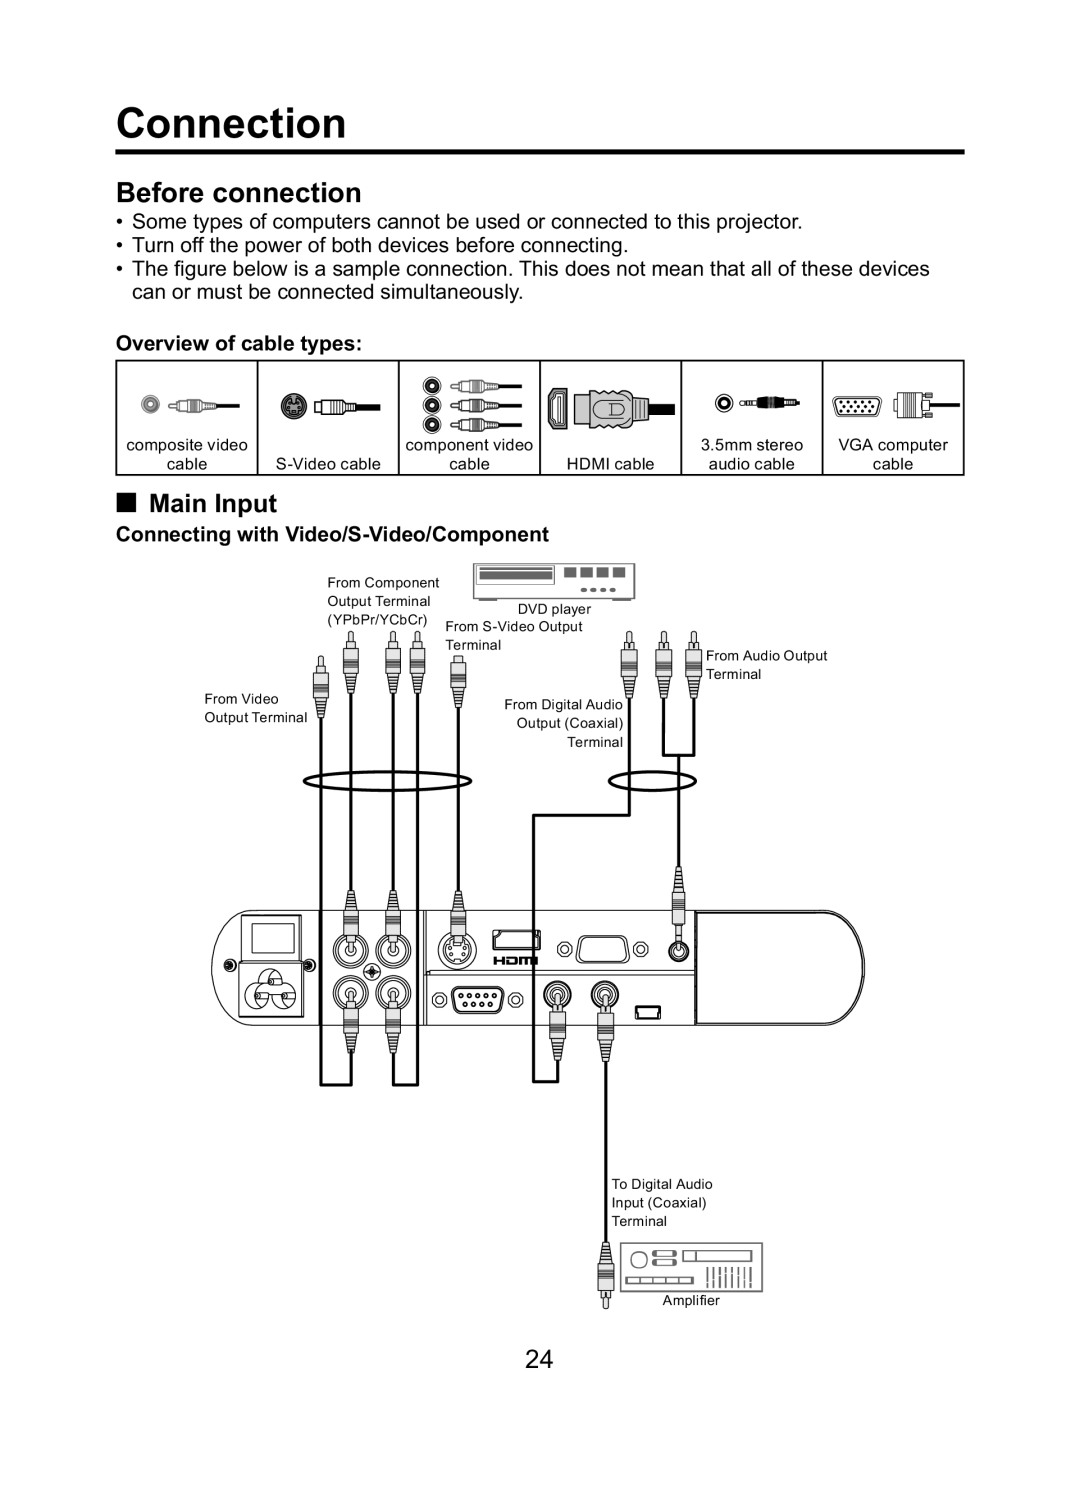 Toshiba TDP-ET10 owner manual Connection, Before connection, Main Input, Overview of cable types 